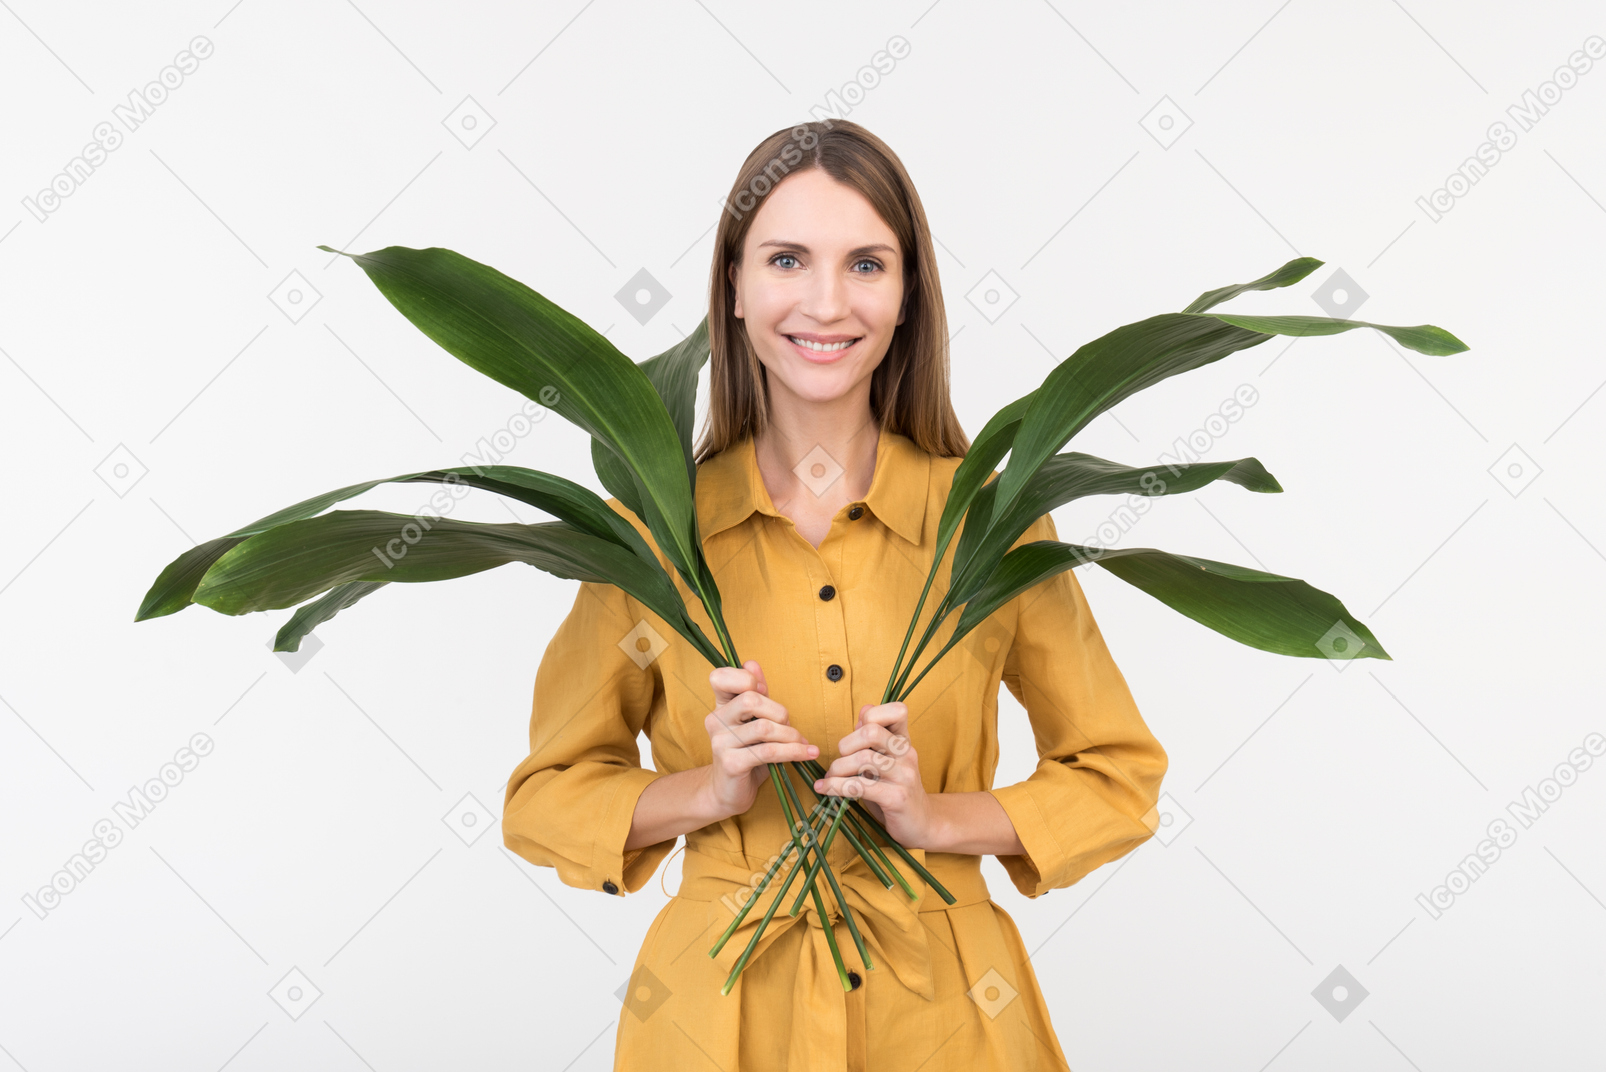 Smiling young woman holding green leaves in both hands